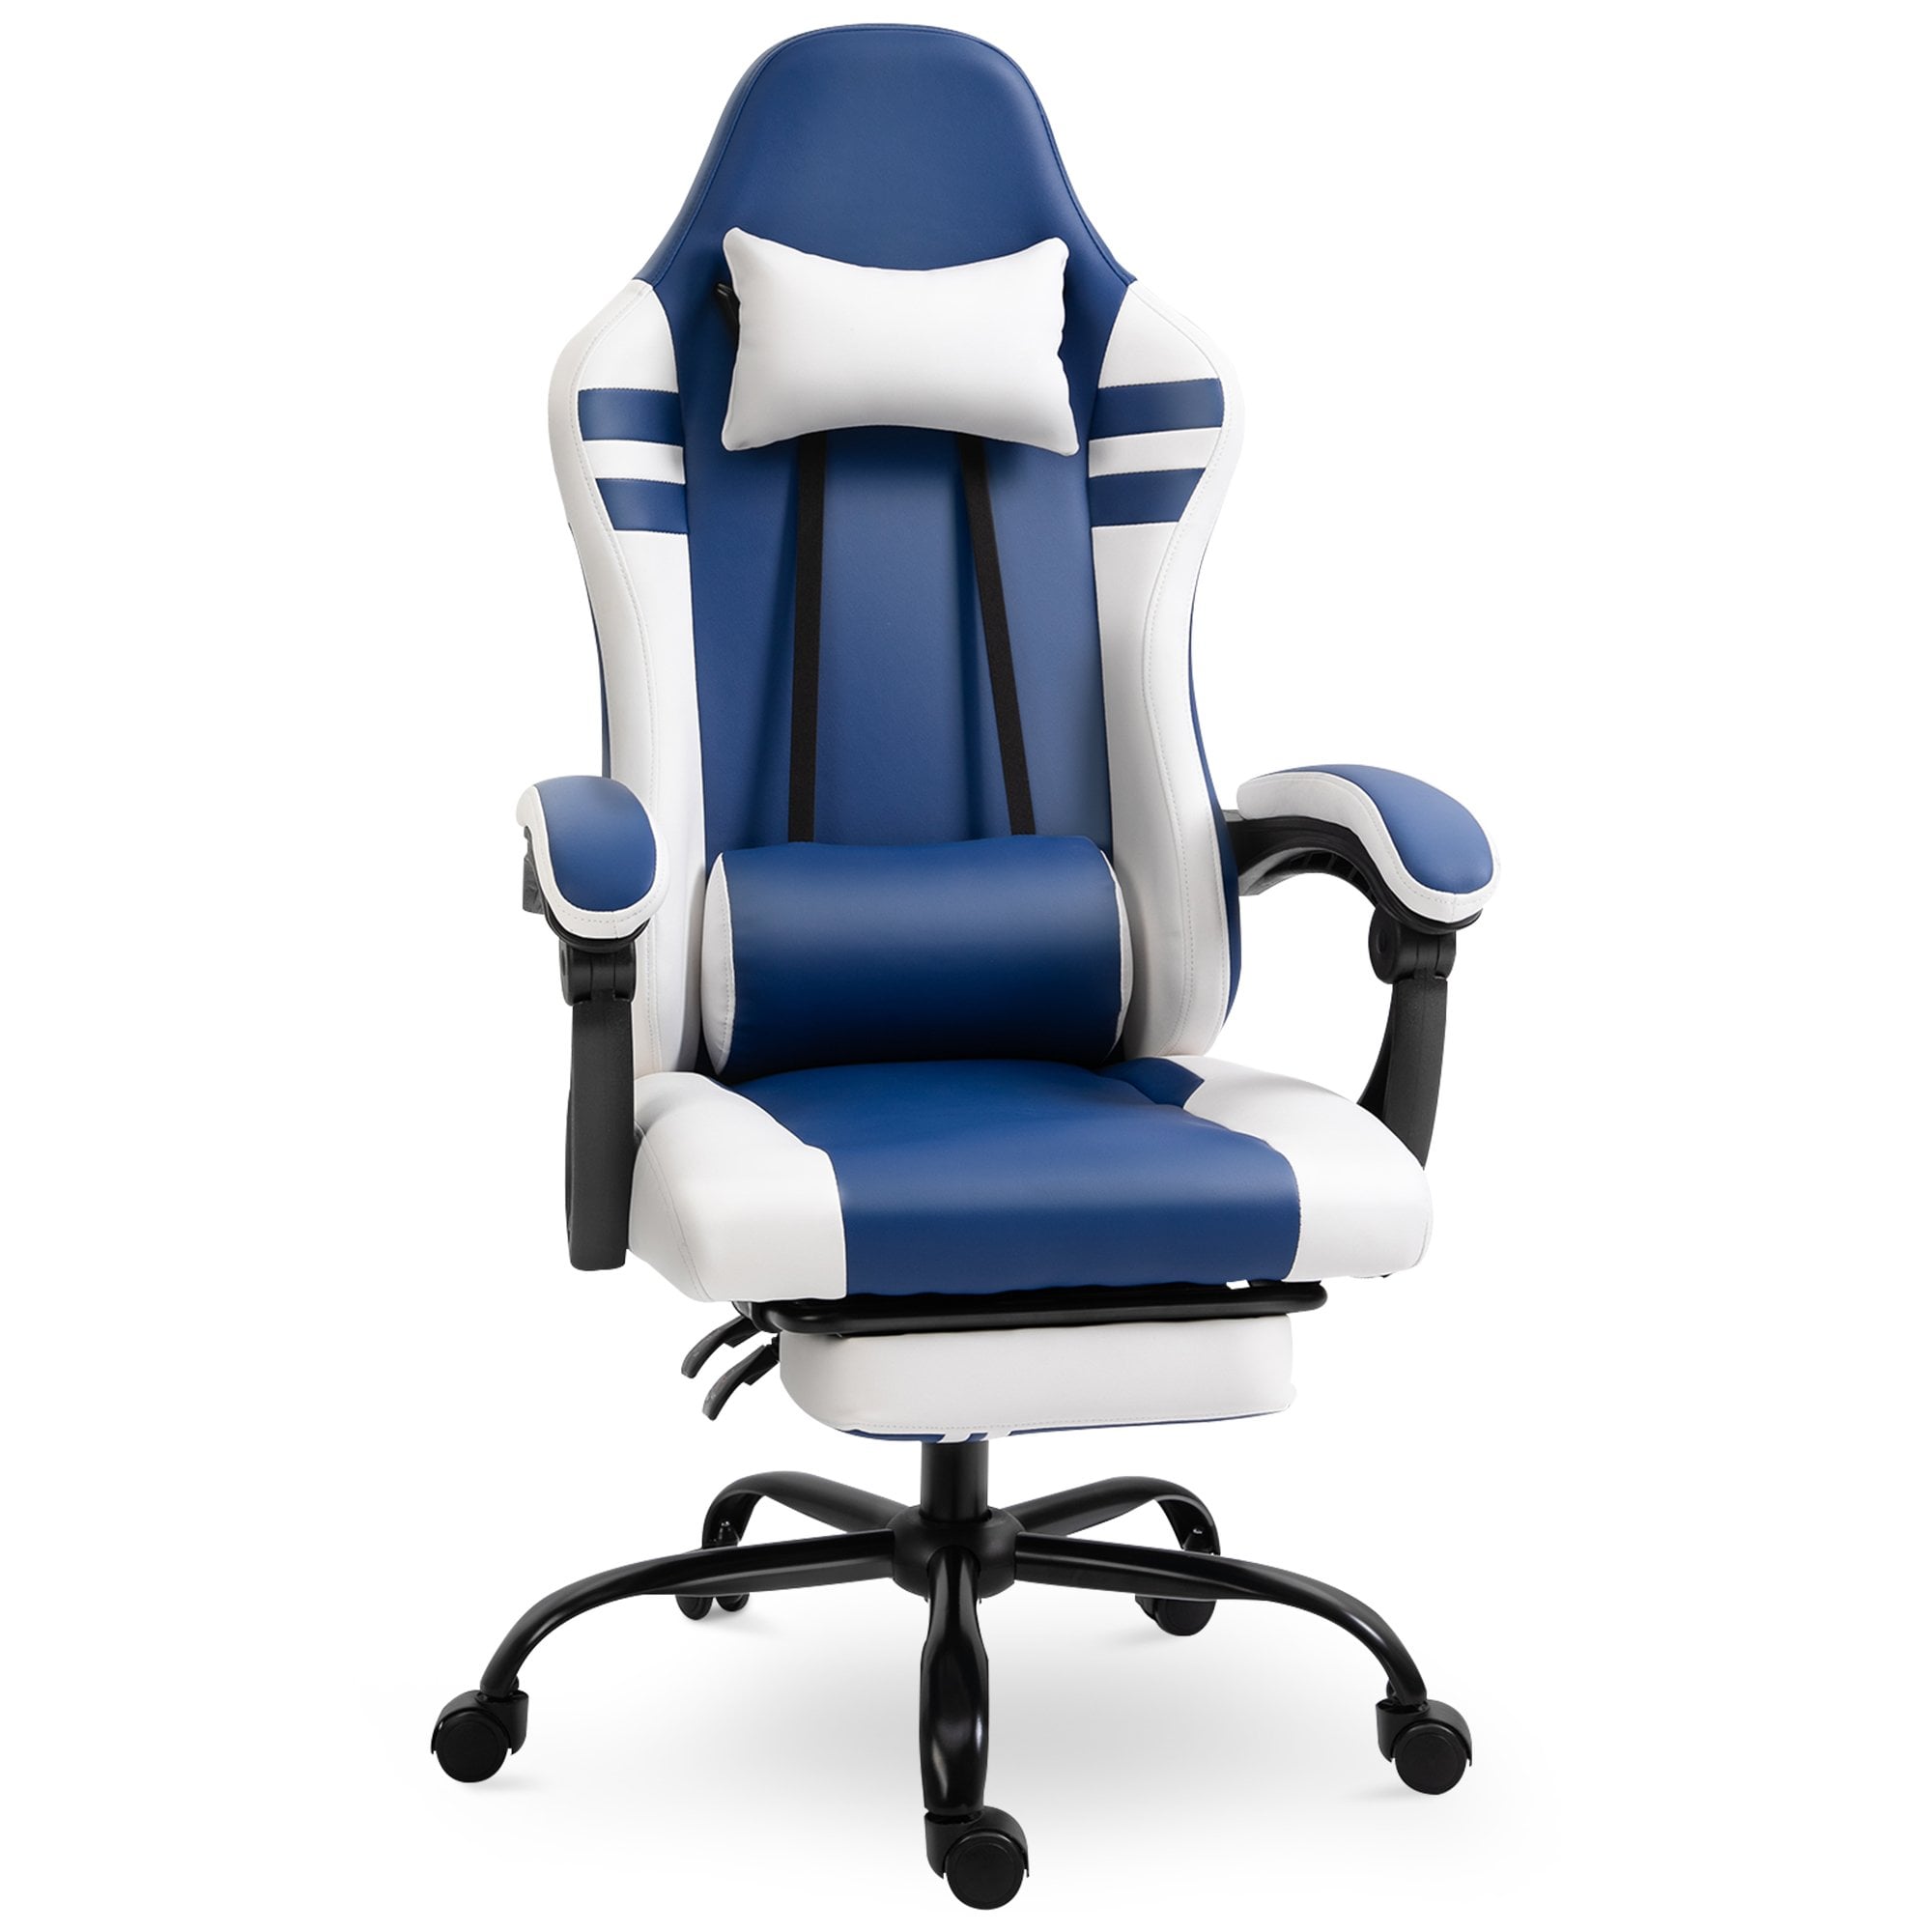 Vinsetto PU Leather Gaming Office Chair Ergonomic Reclining Gaming Chair w/ Retractable Footrest Blue/White - CARTER  | TJ Hughes White